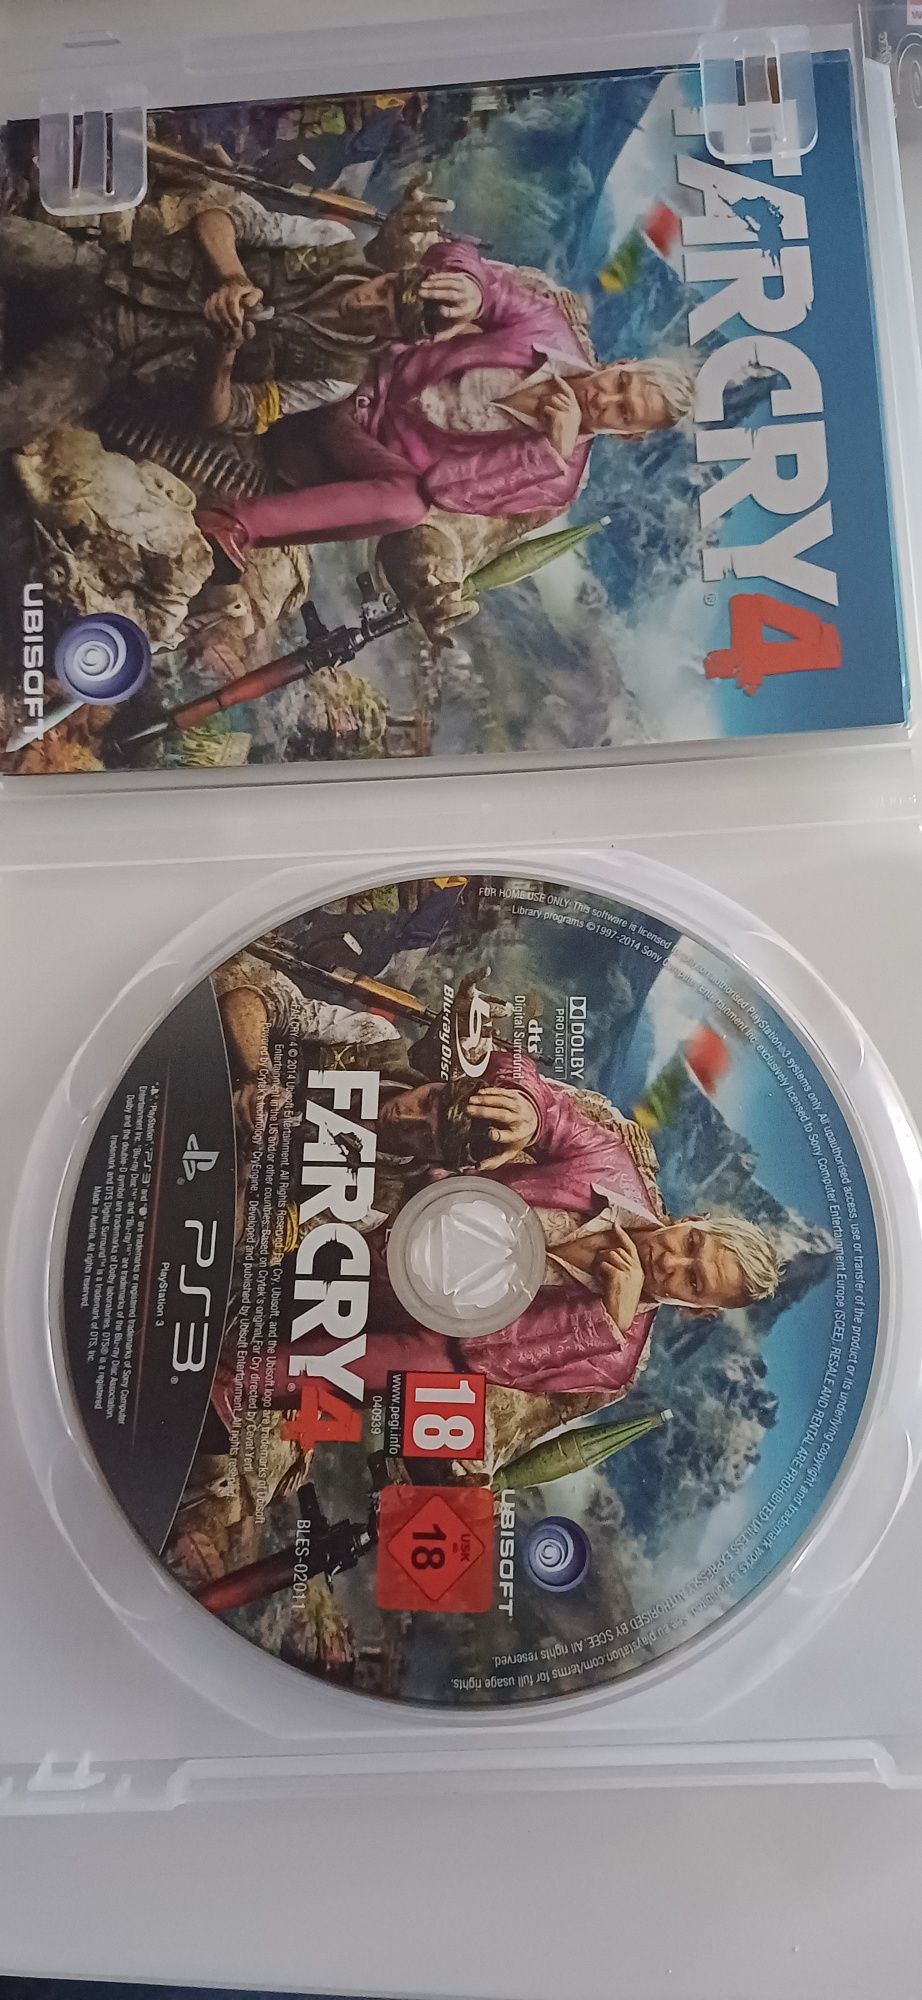 Farcry 4 pl na ps3